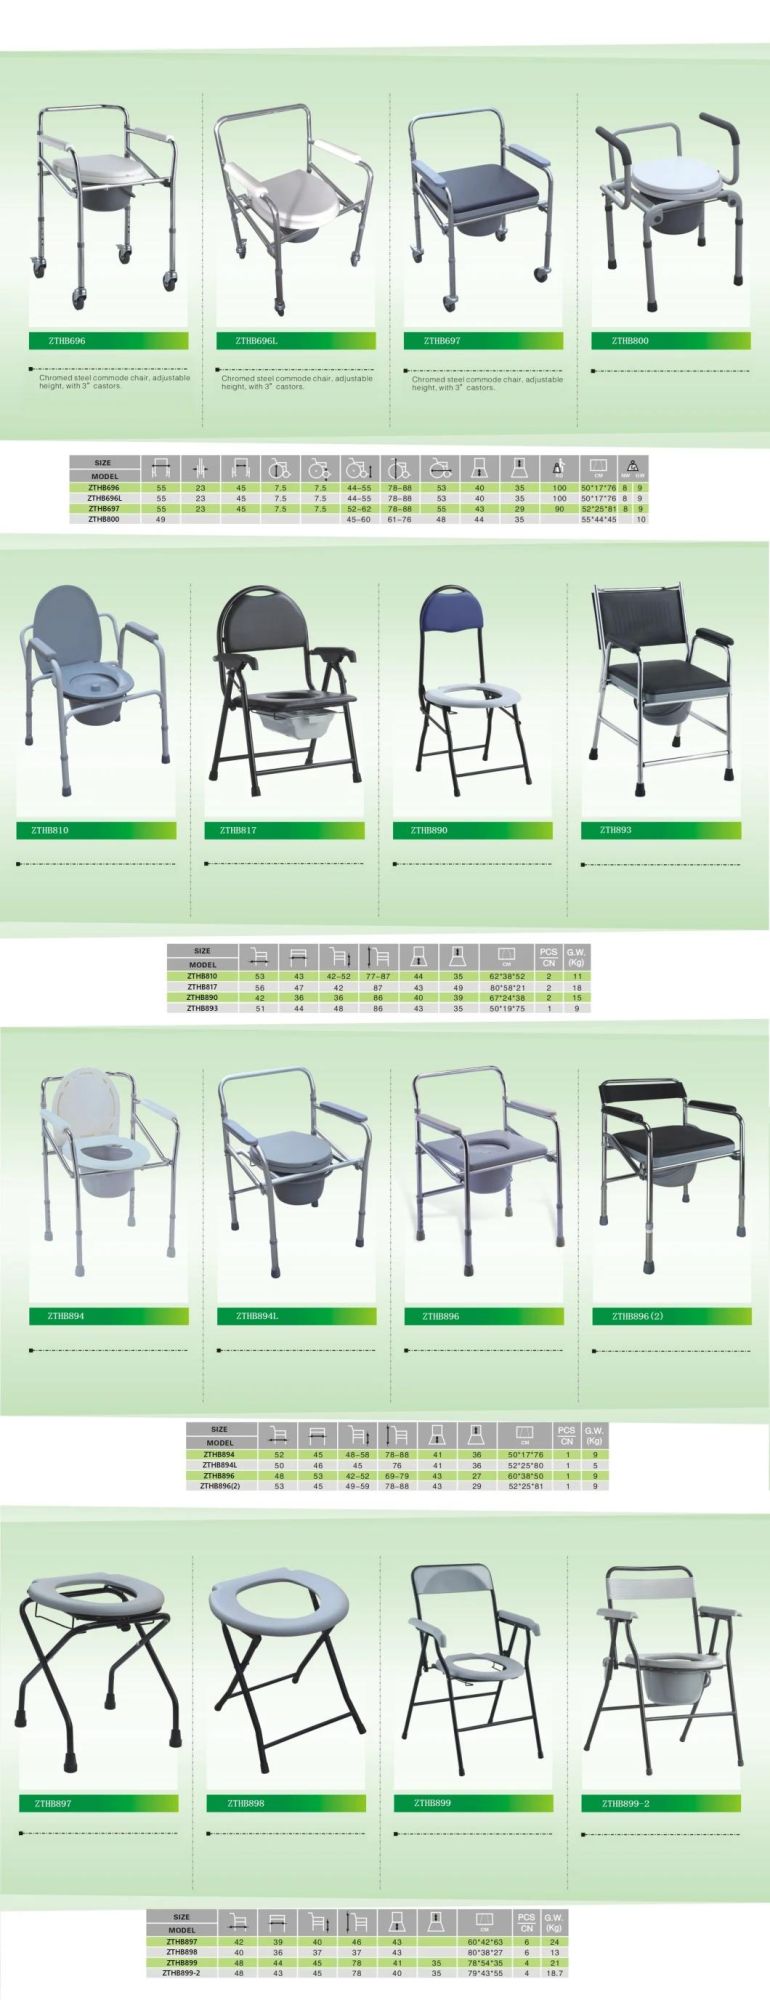 Cheap Price Folding Bathroom Commode Chair with Bucket Patient Toilet Chair Wheelchair for Elderly Steel Commode Wheel Chair